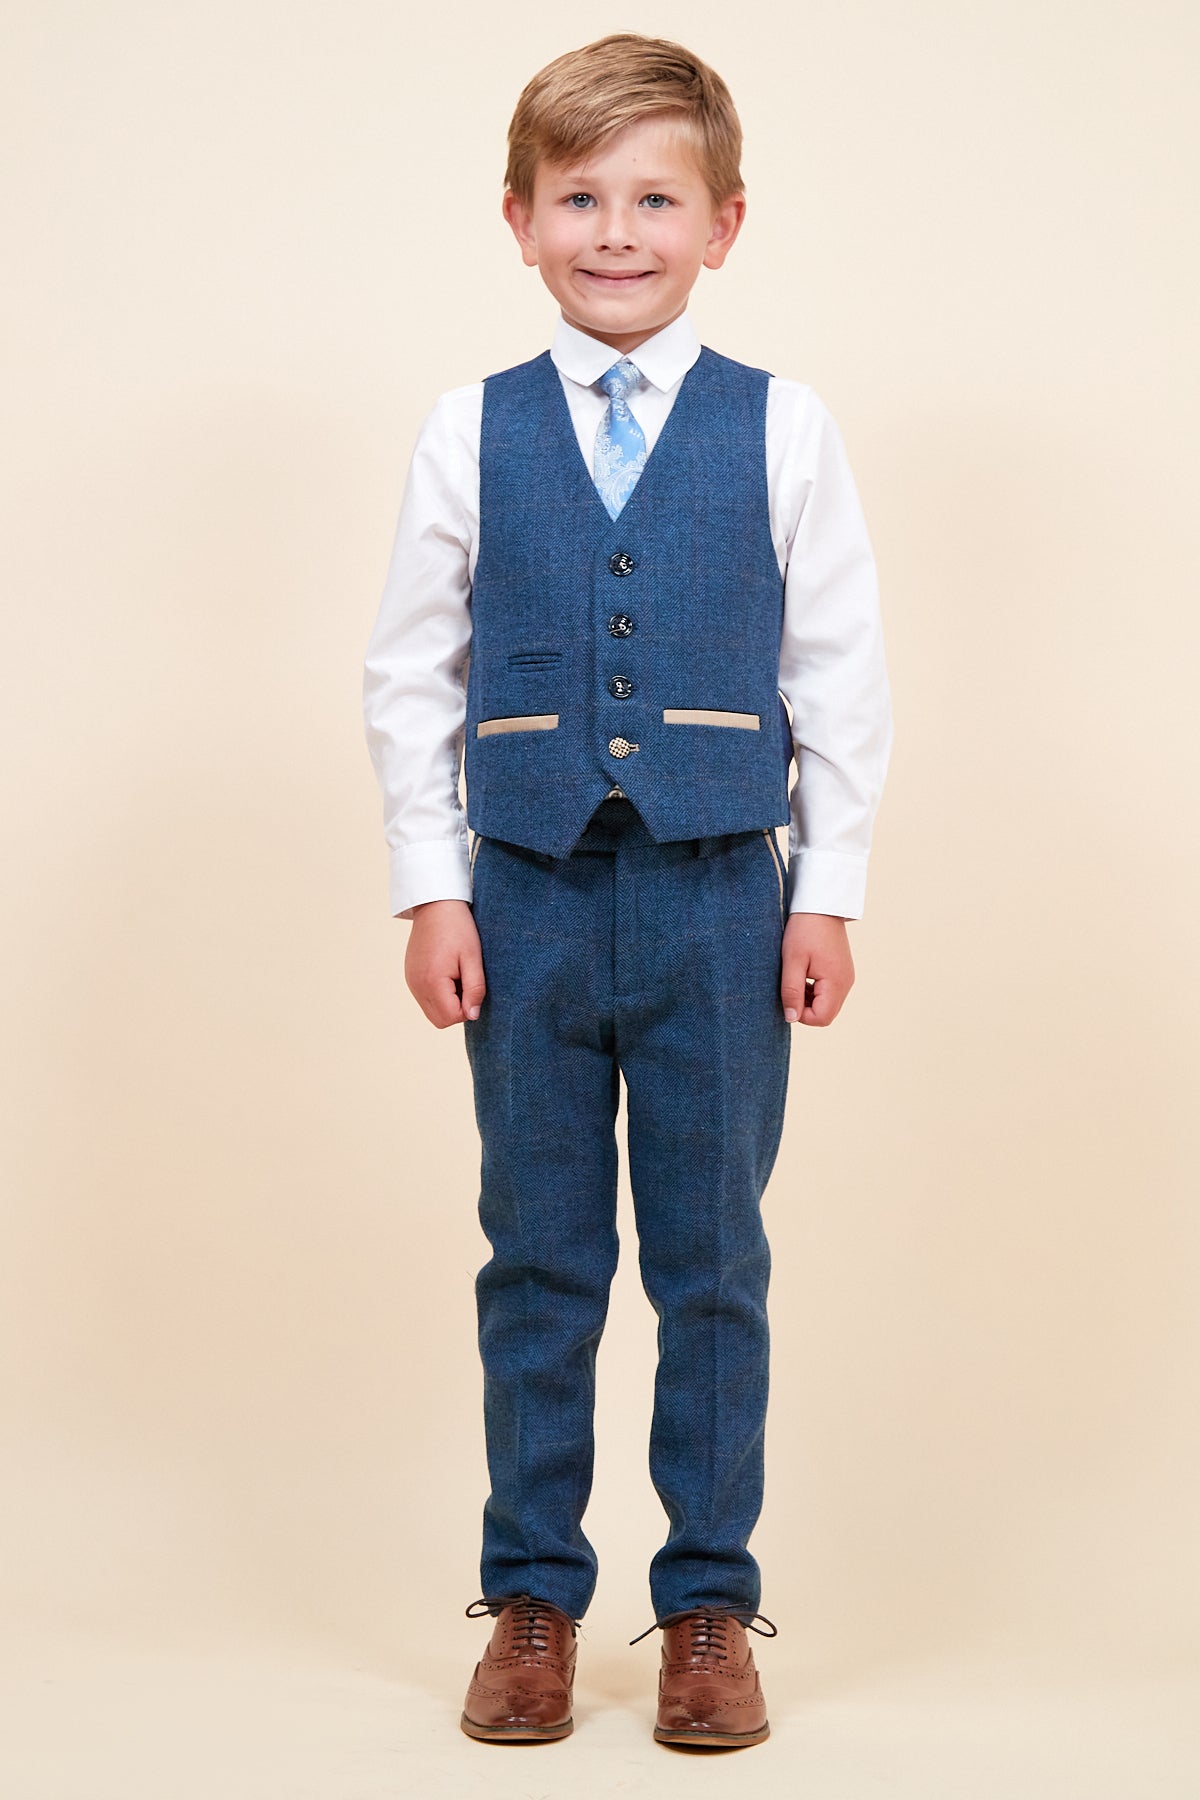 DION - Childrens Blue Tweed Check Three Piece Suit-Childrens Suits-marcdarcy-Marc Darcy